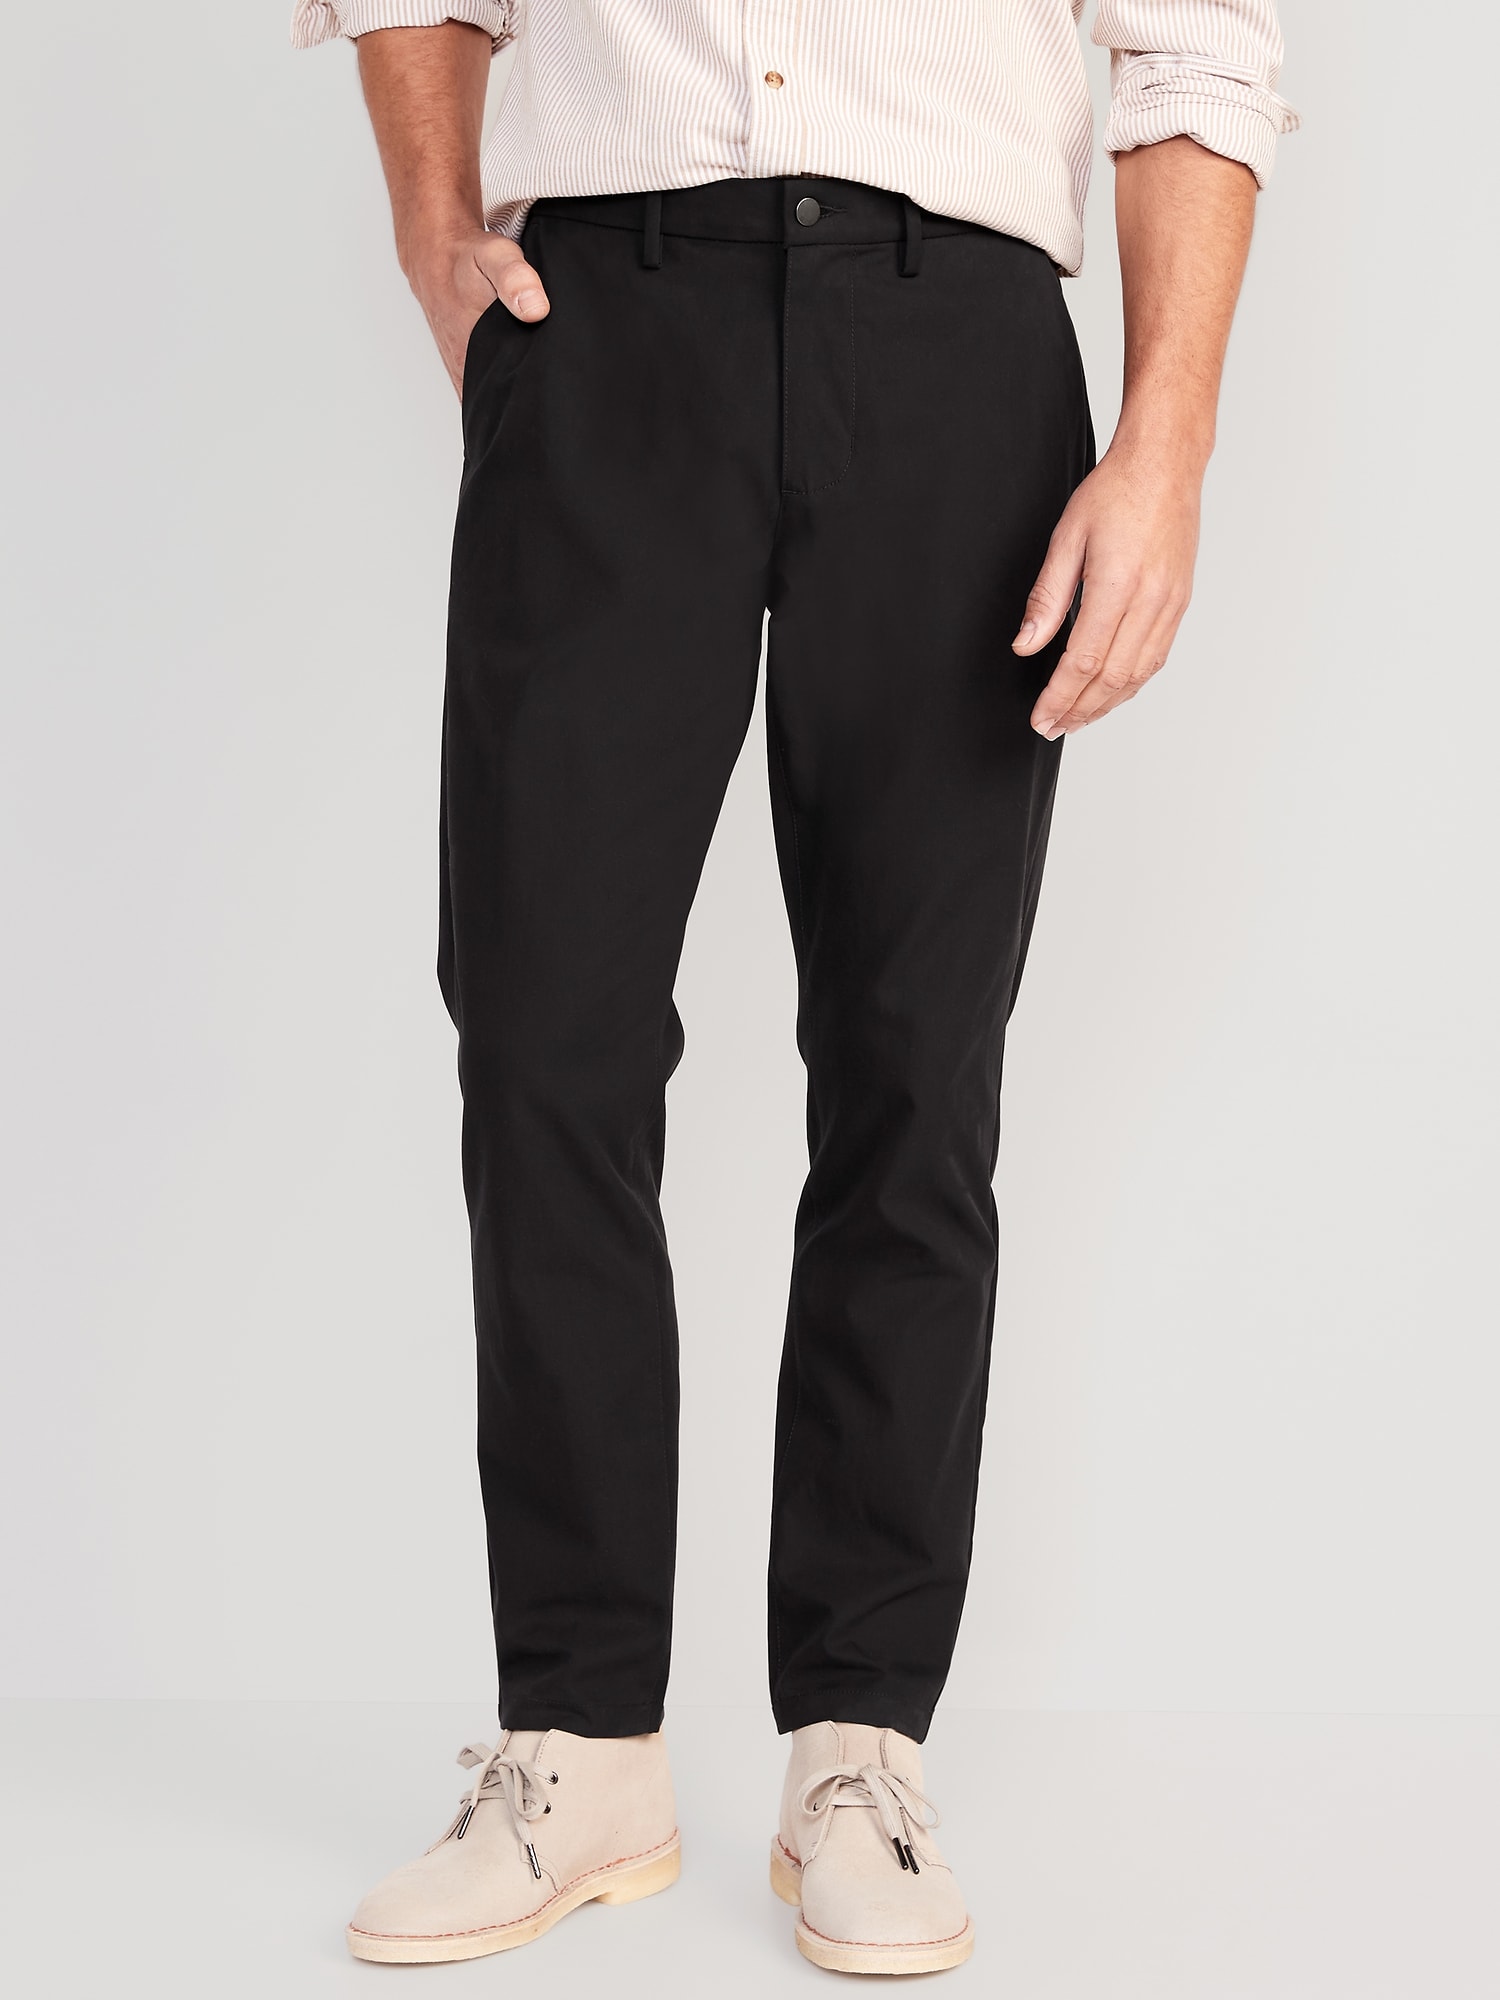 Athletic Ultimate Tech Built-In Flex Chino Pants | Old Navy